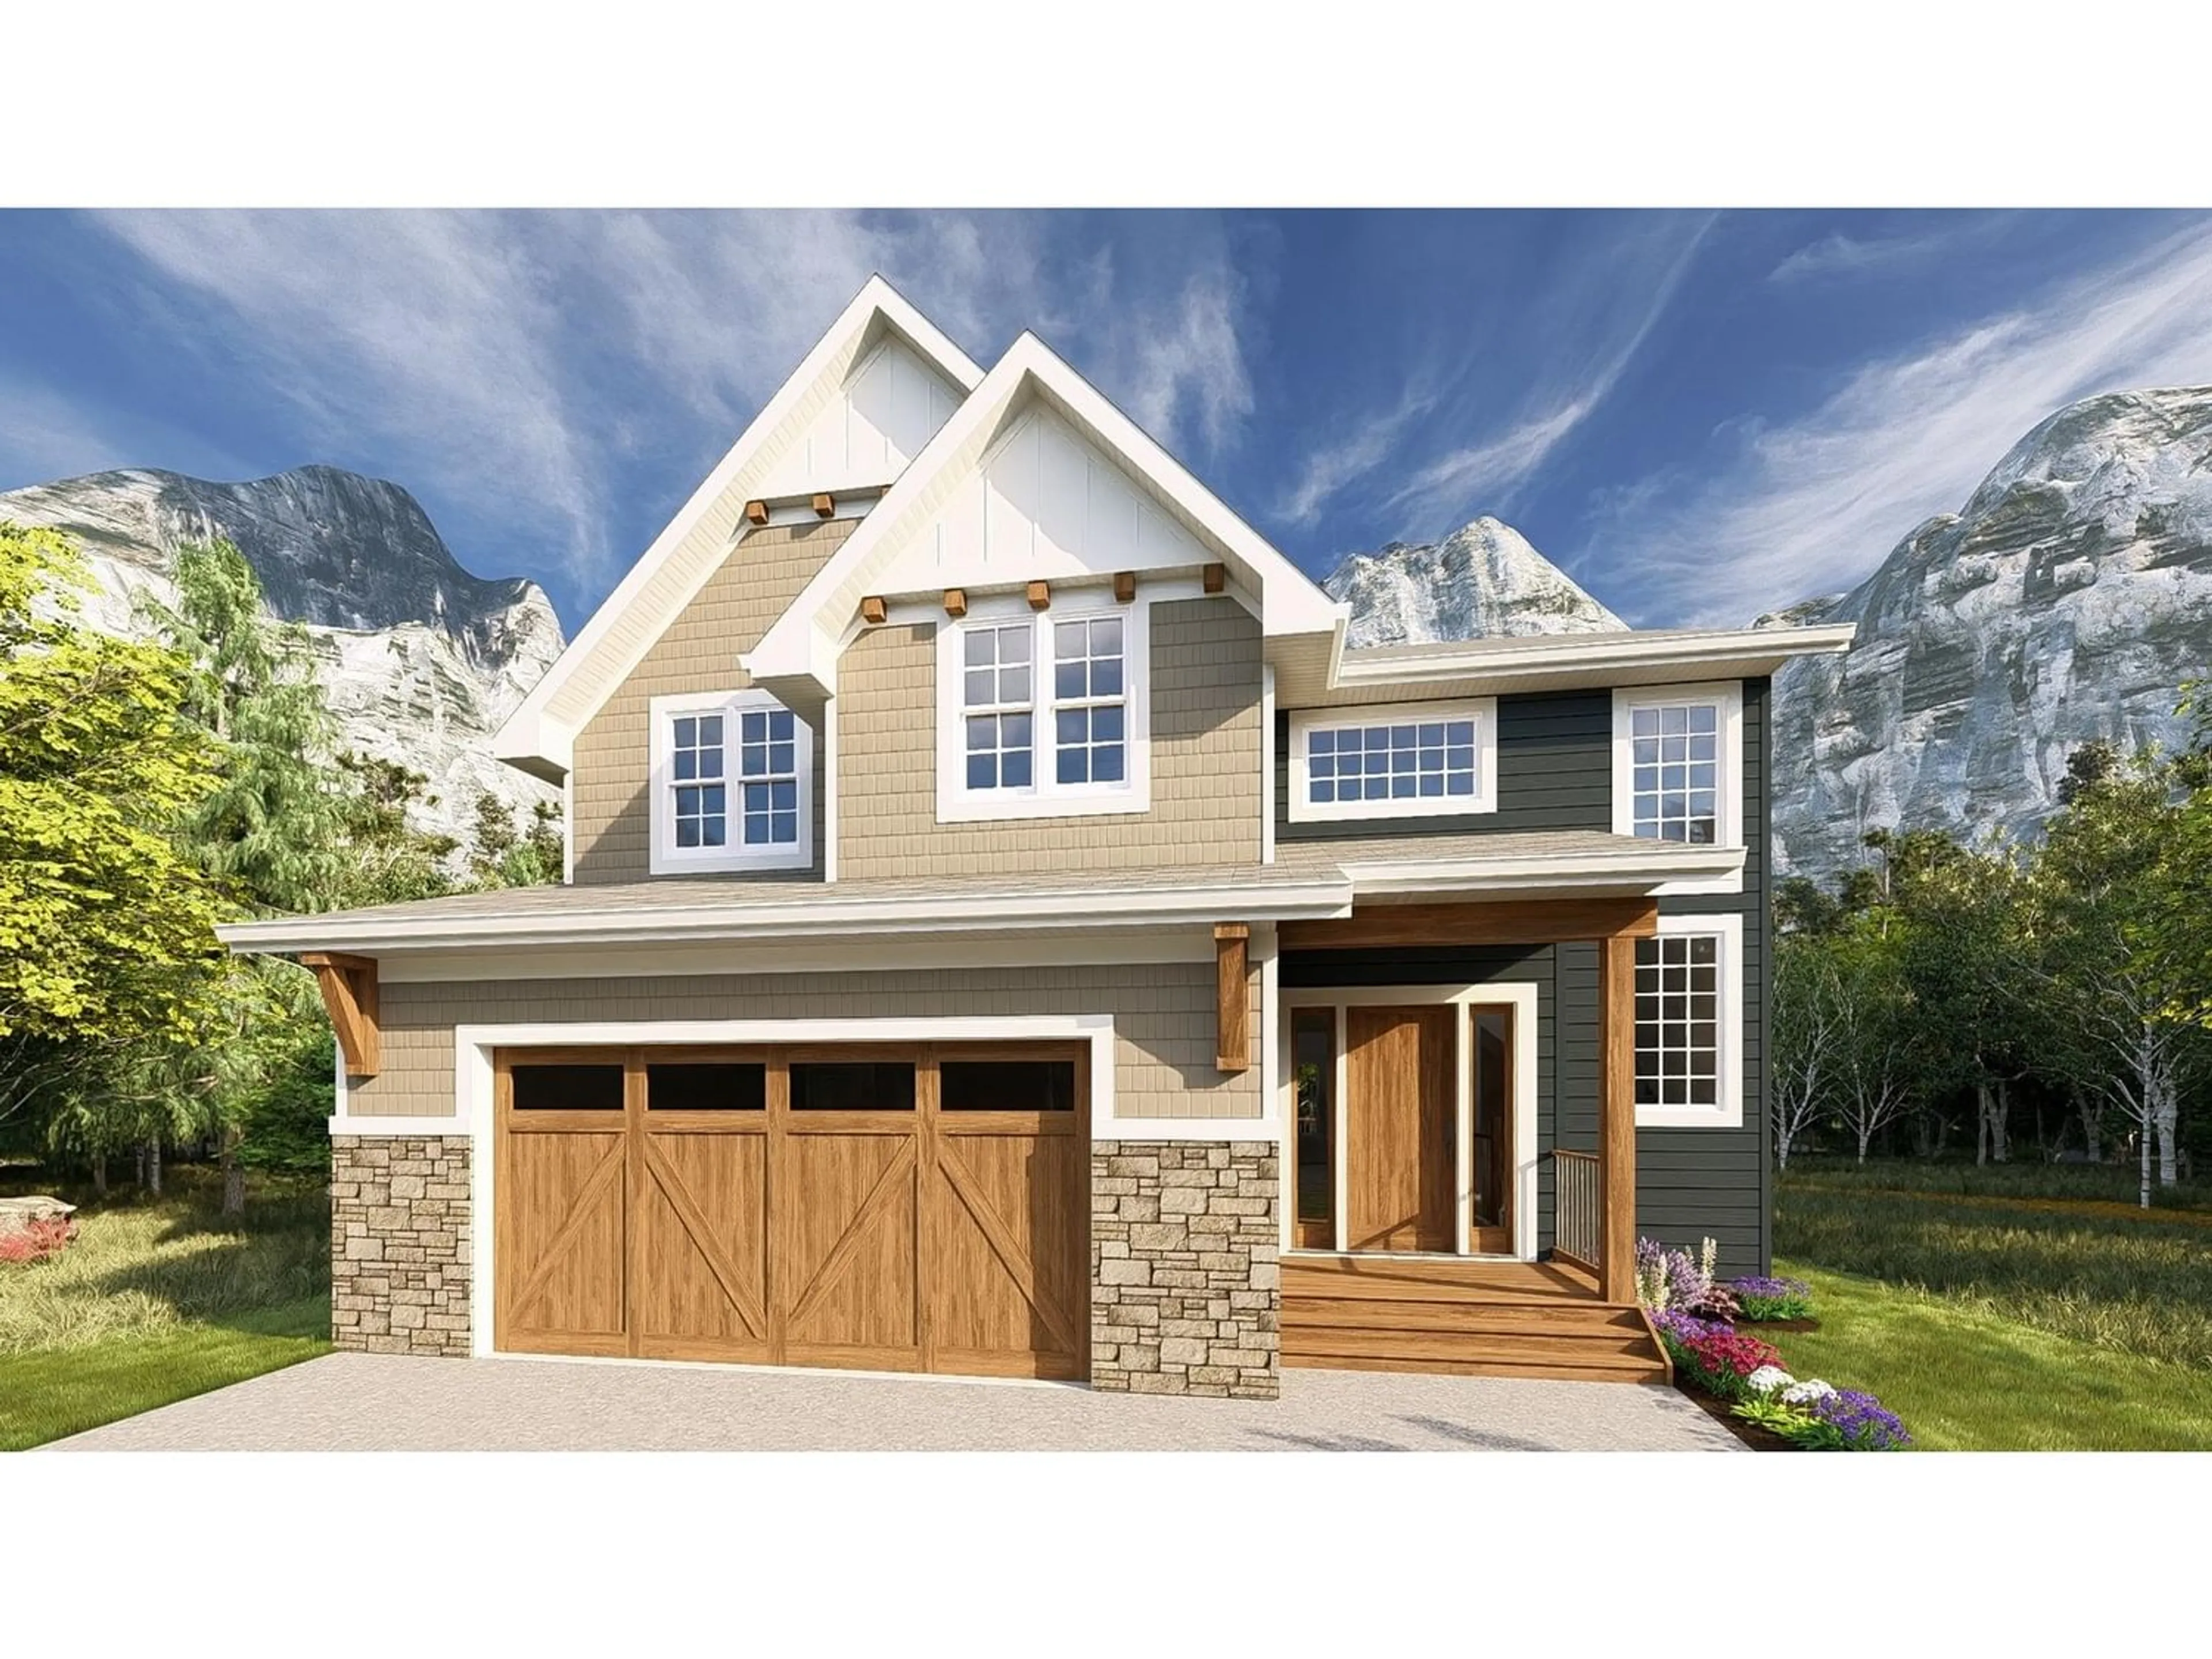 Home with vinyl exterior material for Lot 14 FOXWOOD TRAIL, Windermere British Columbia V0B2L2